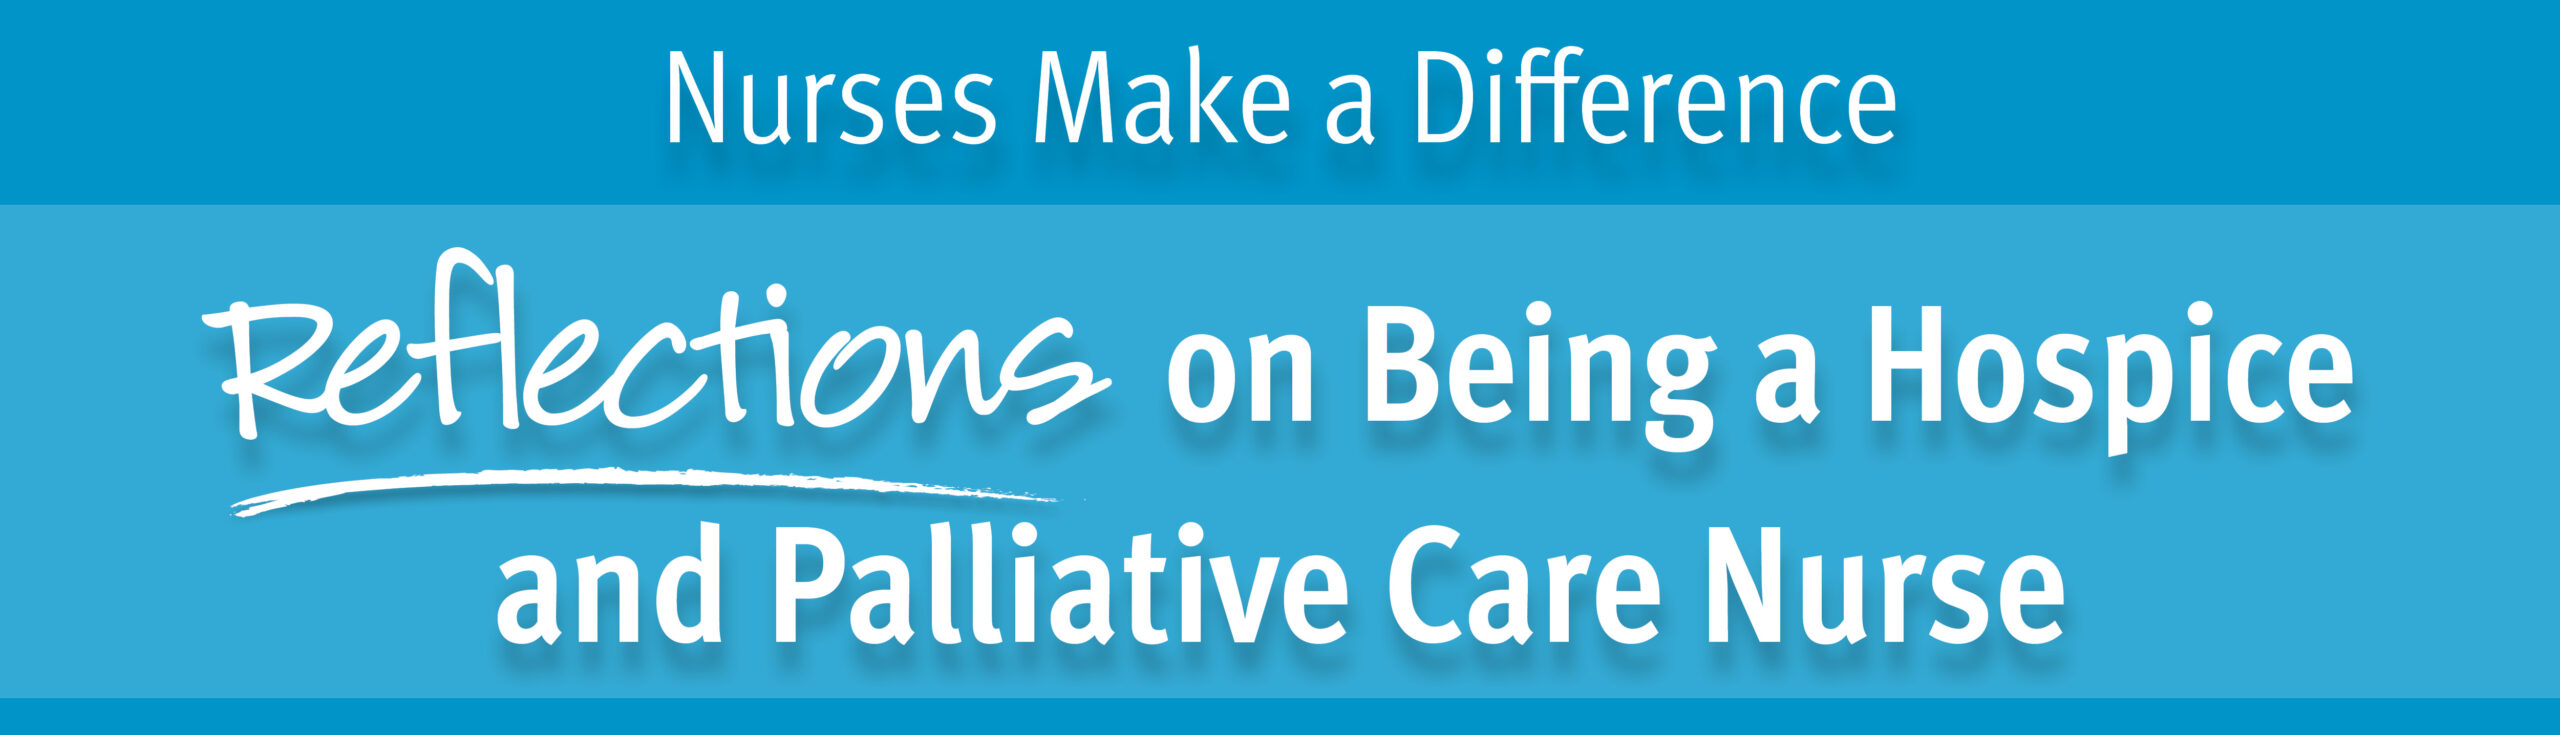 Nurses Make a Difference. Reflections on Being a Hospice and Palliative Care Nurse